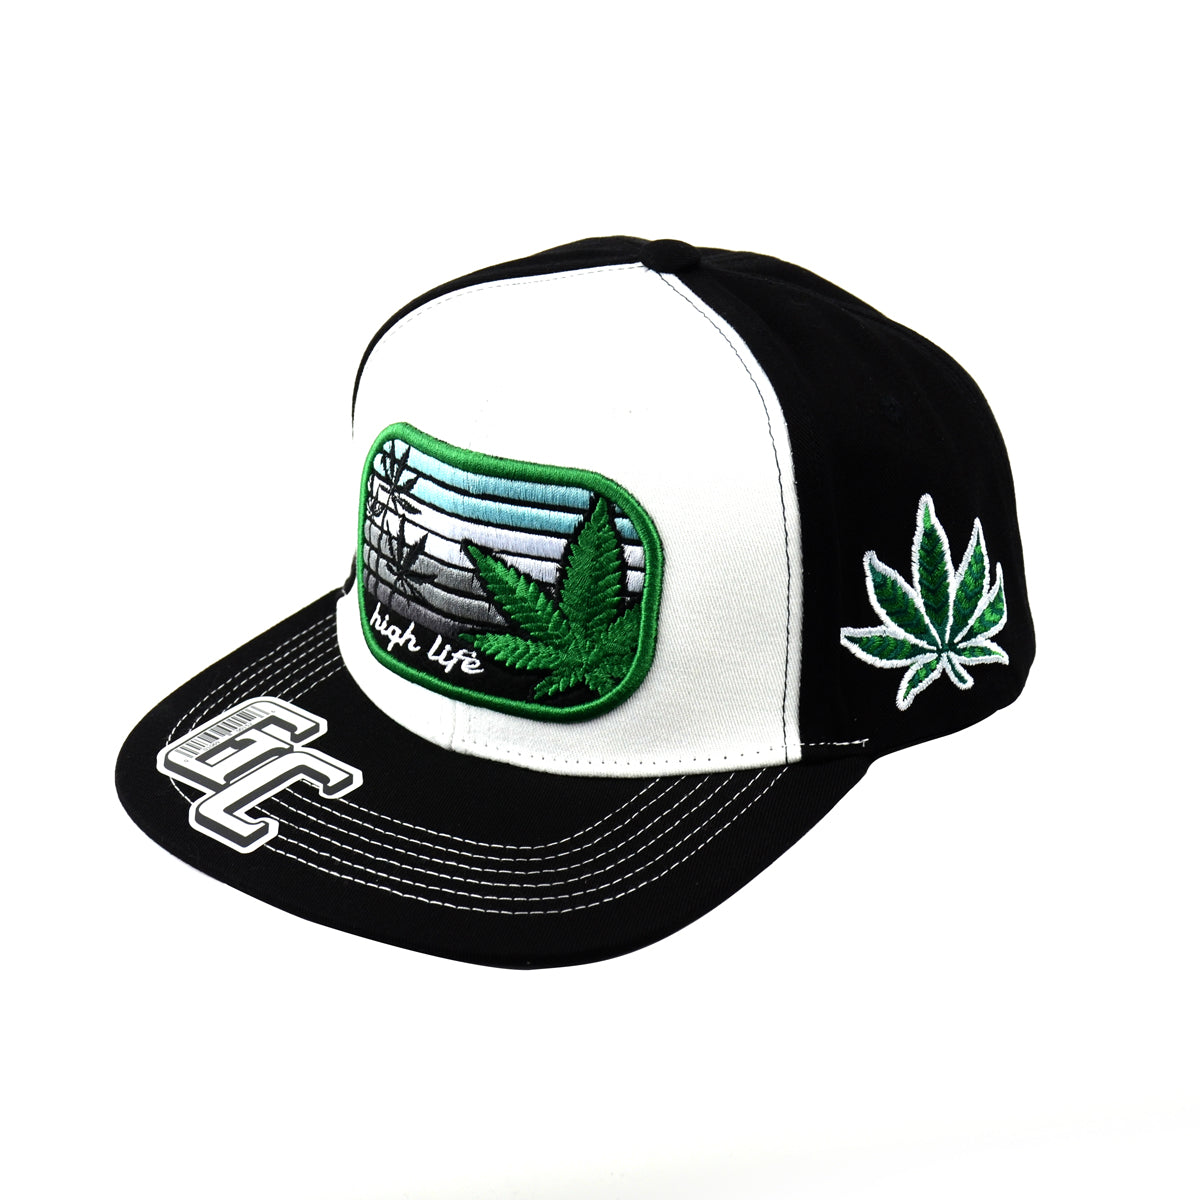 Snapback ''High Life Weed Leaf'' HAT Embroidered